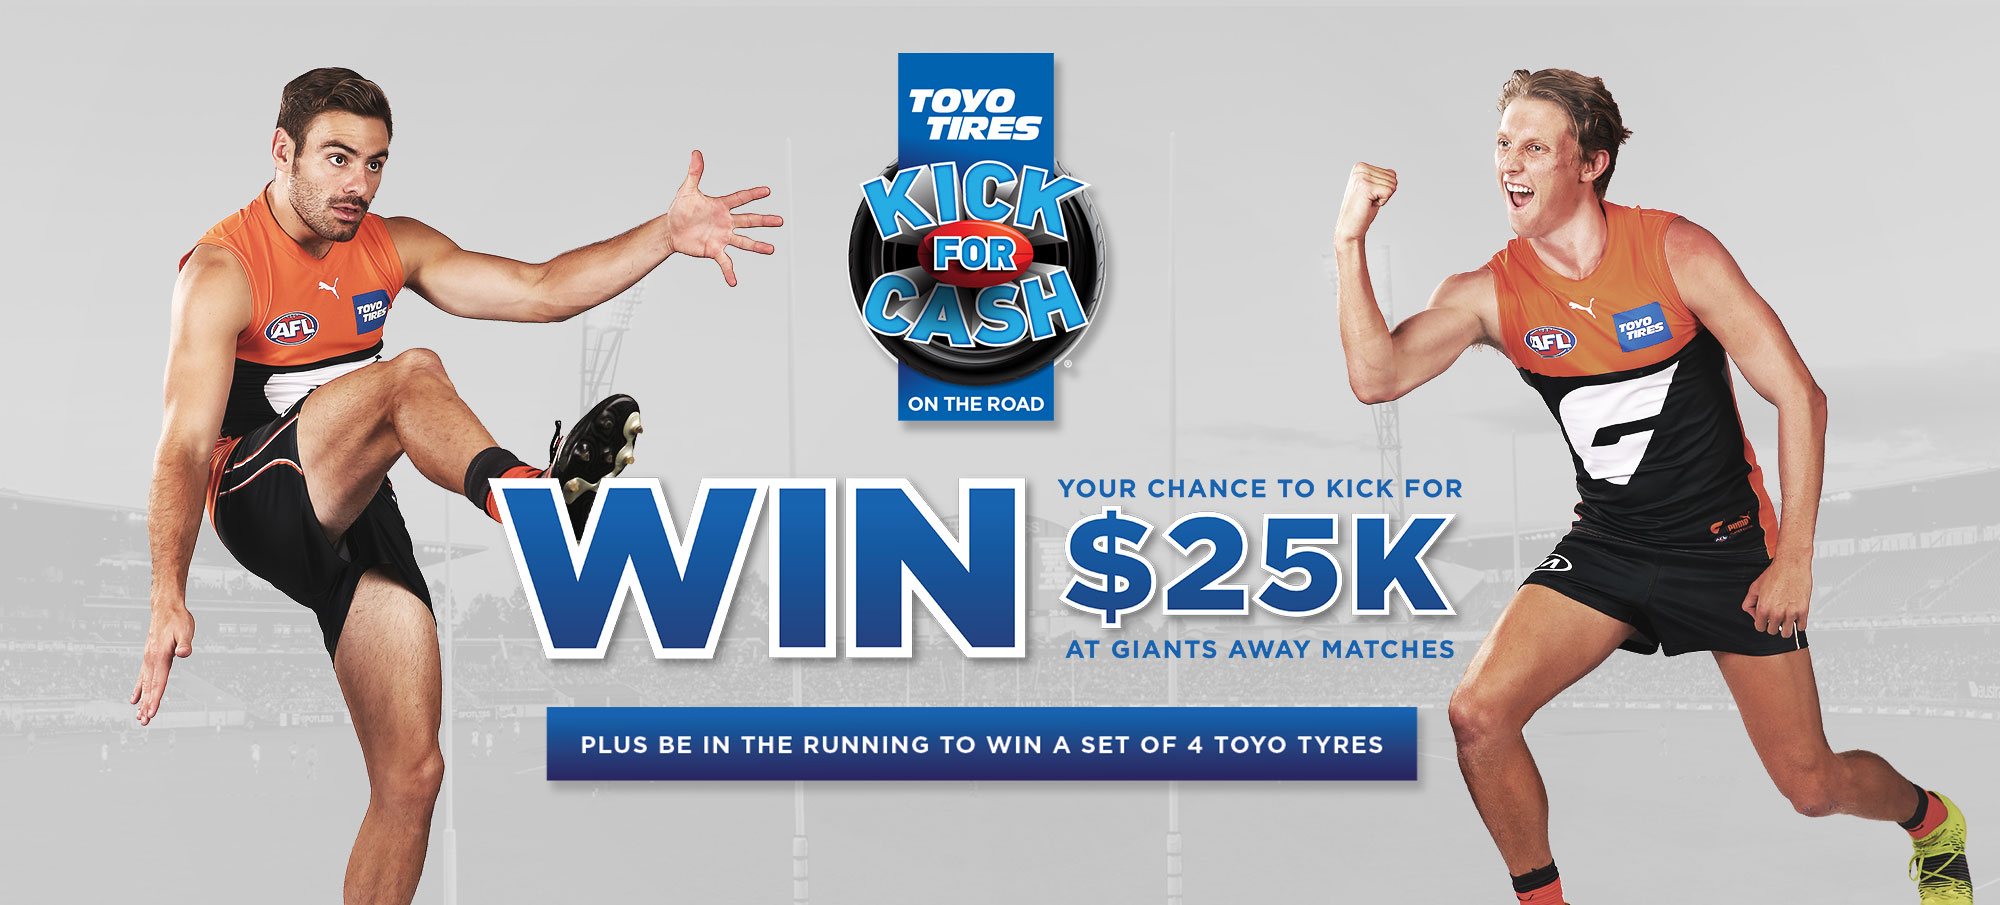 Win your chance to kick for $25k, enter your details to be in the draw.